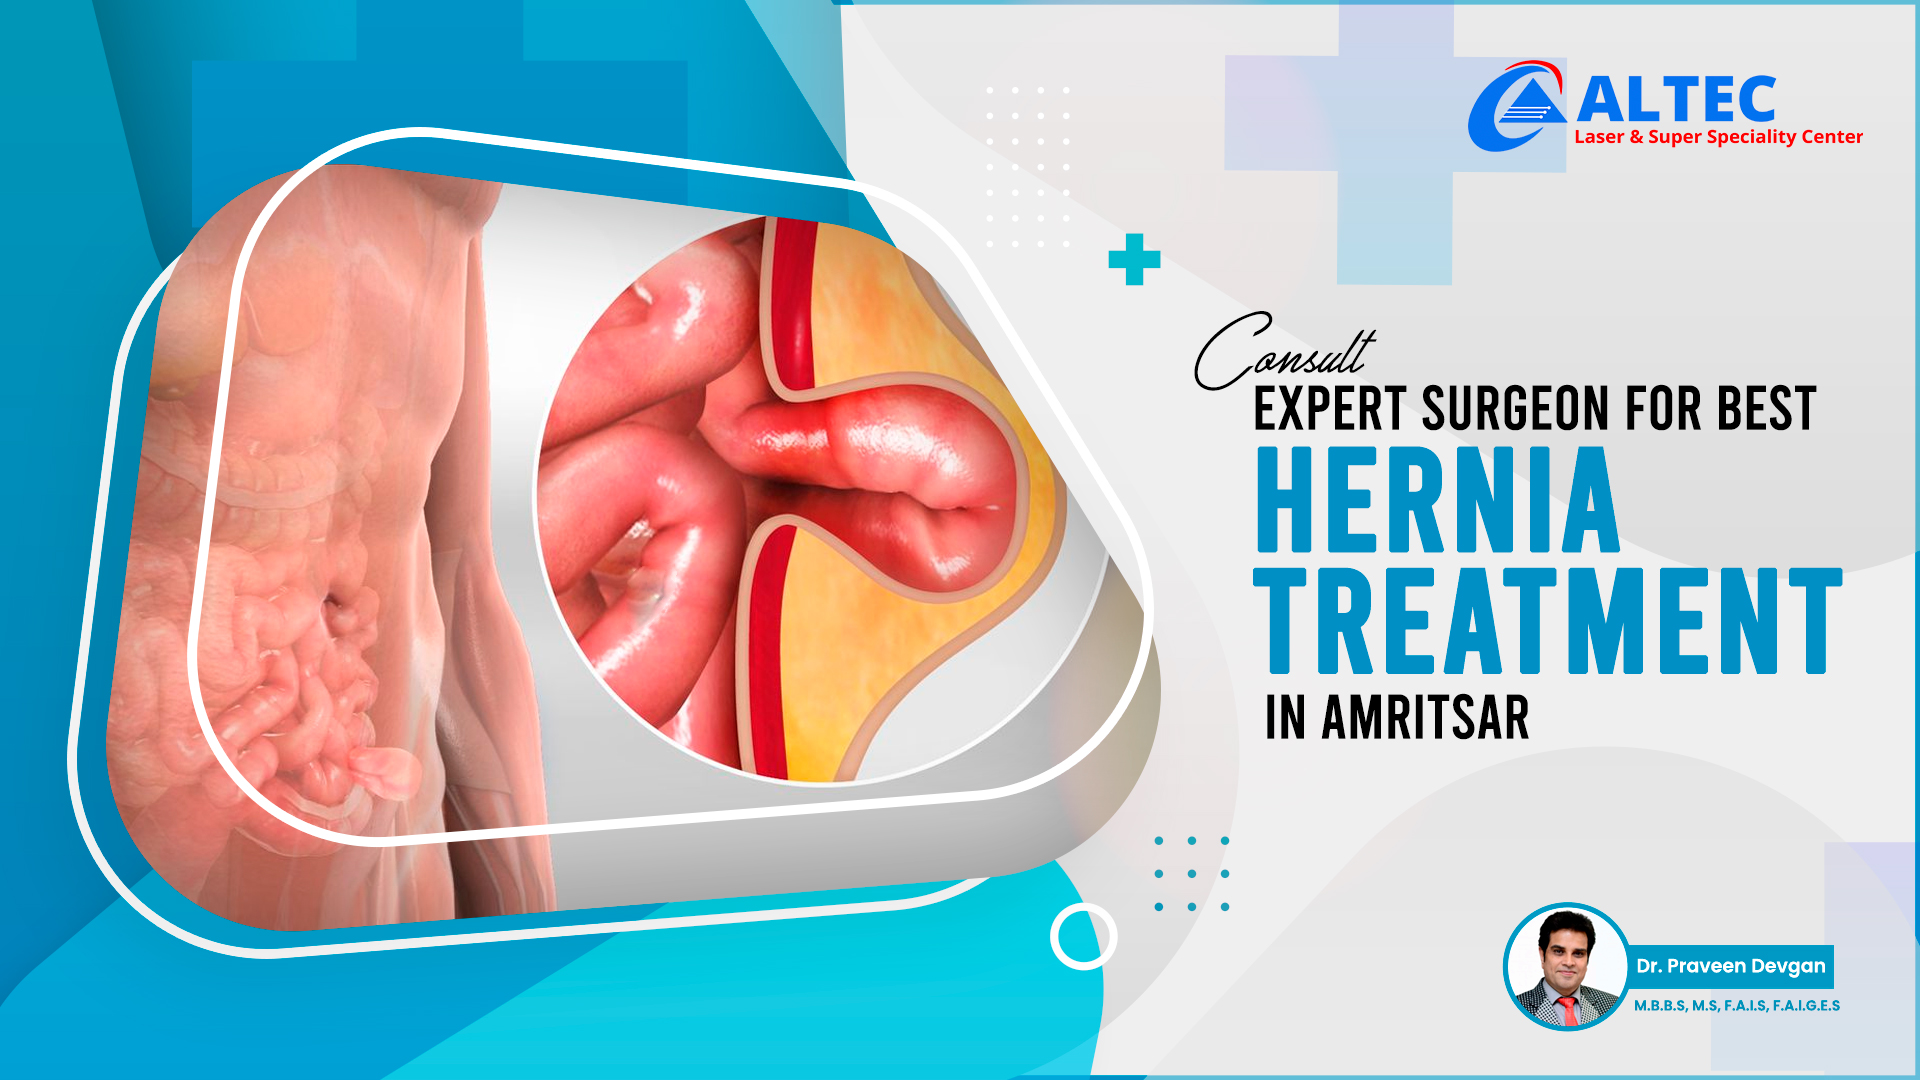 Consult Expert Surgeon for Best Hernia Treatment in Amritsar